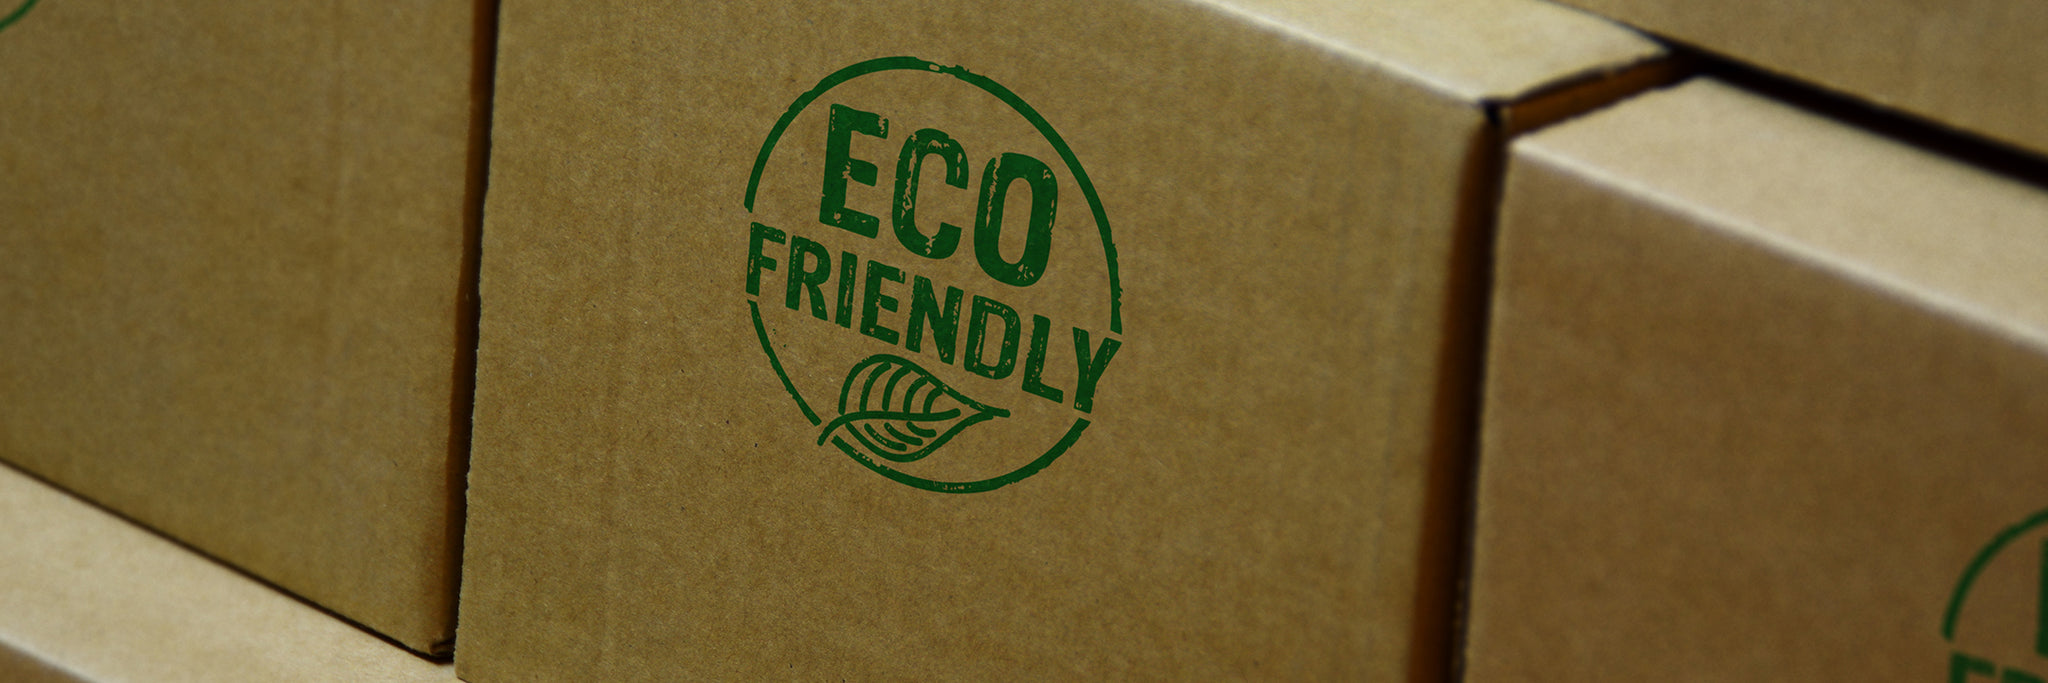 5 WAYS TO MAKE YOUR SCREEN PRINT SHOP MORE ECO-FRIENDLY